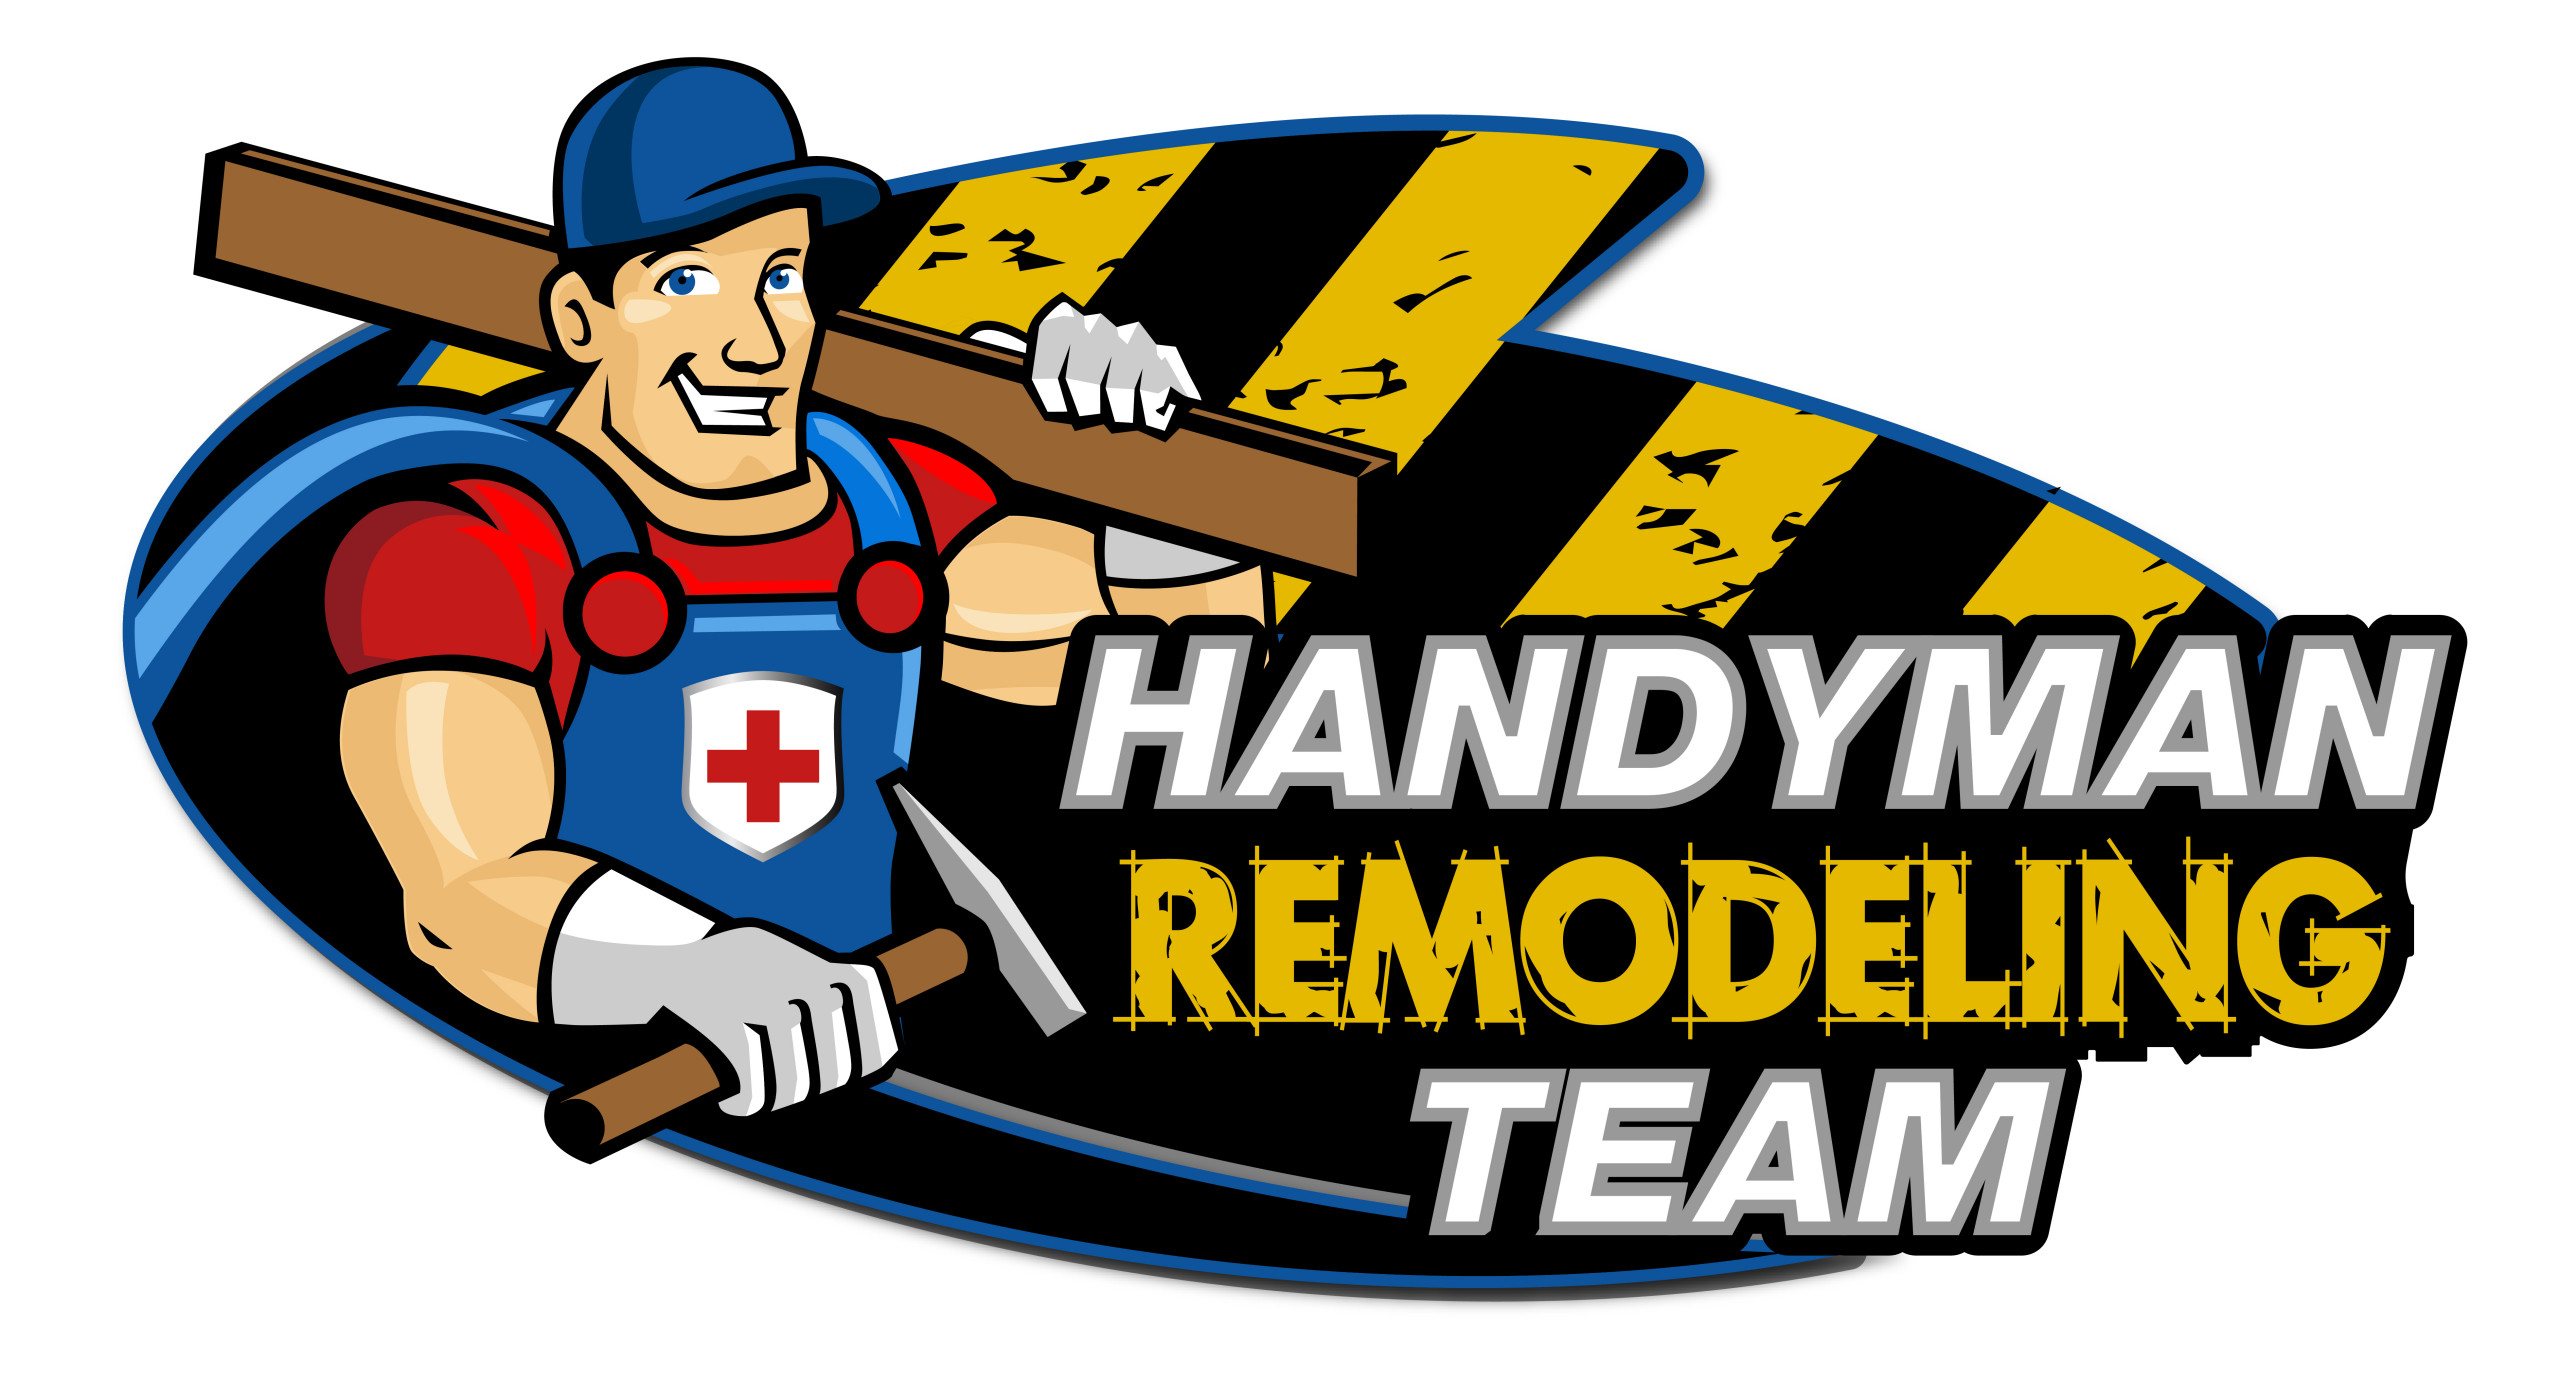 Handyman Remodeling Team | Seattle Commercial Services & Tenant Improvements